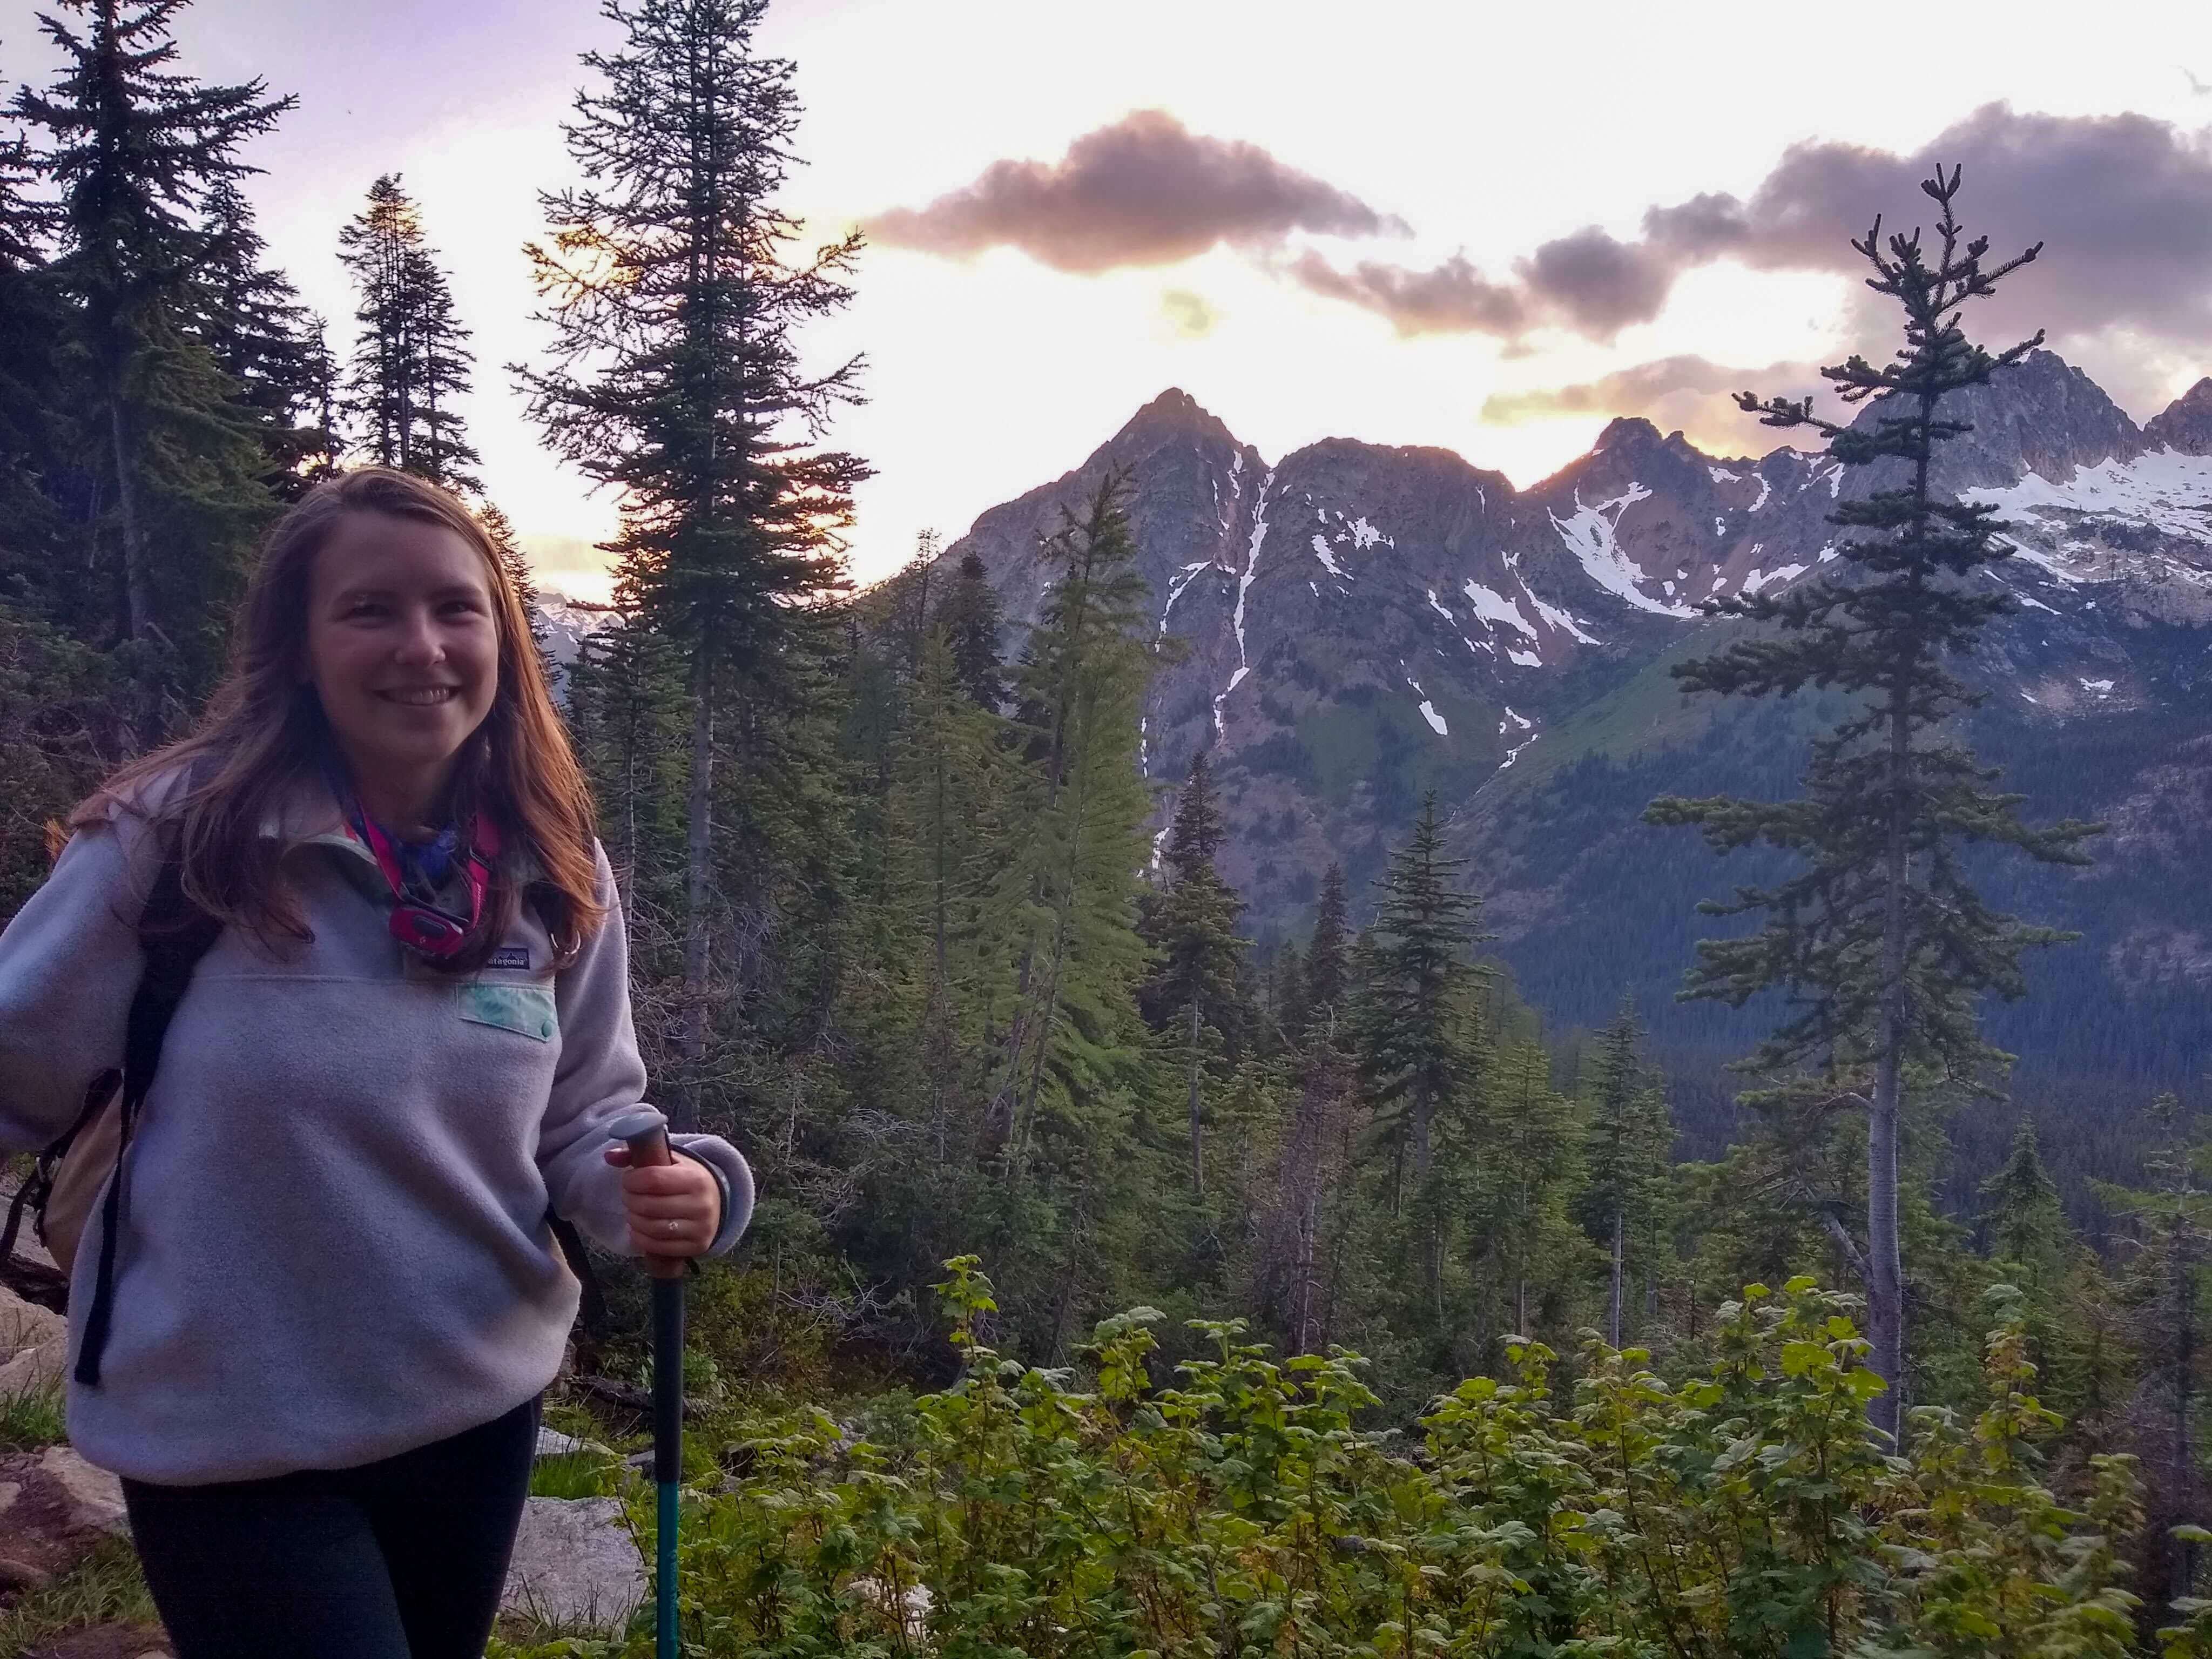 Author of Amateur Adventure Journal smiling during a sunset hike